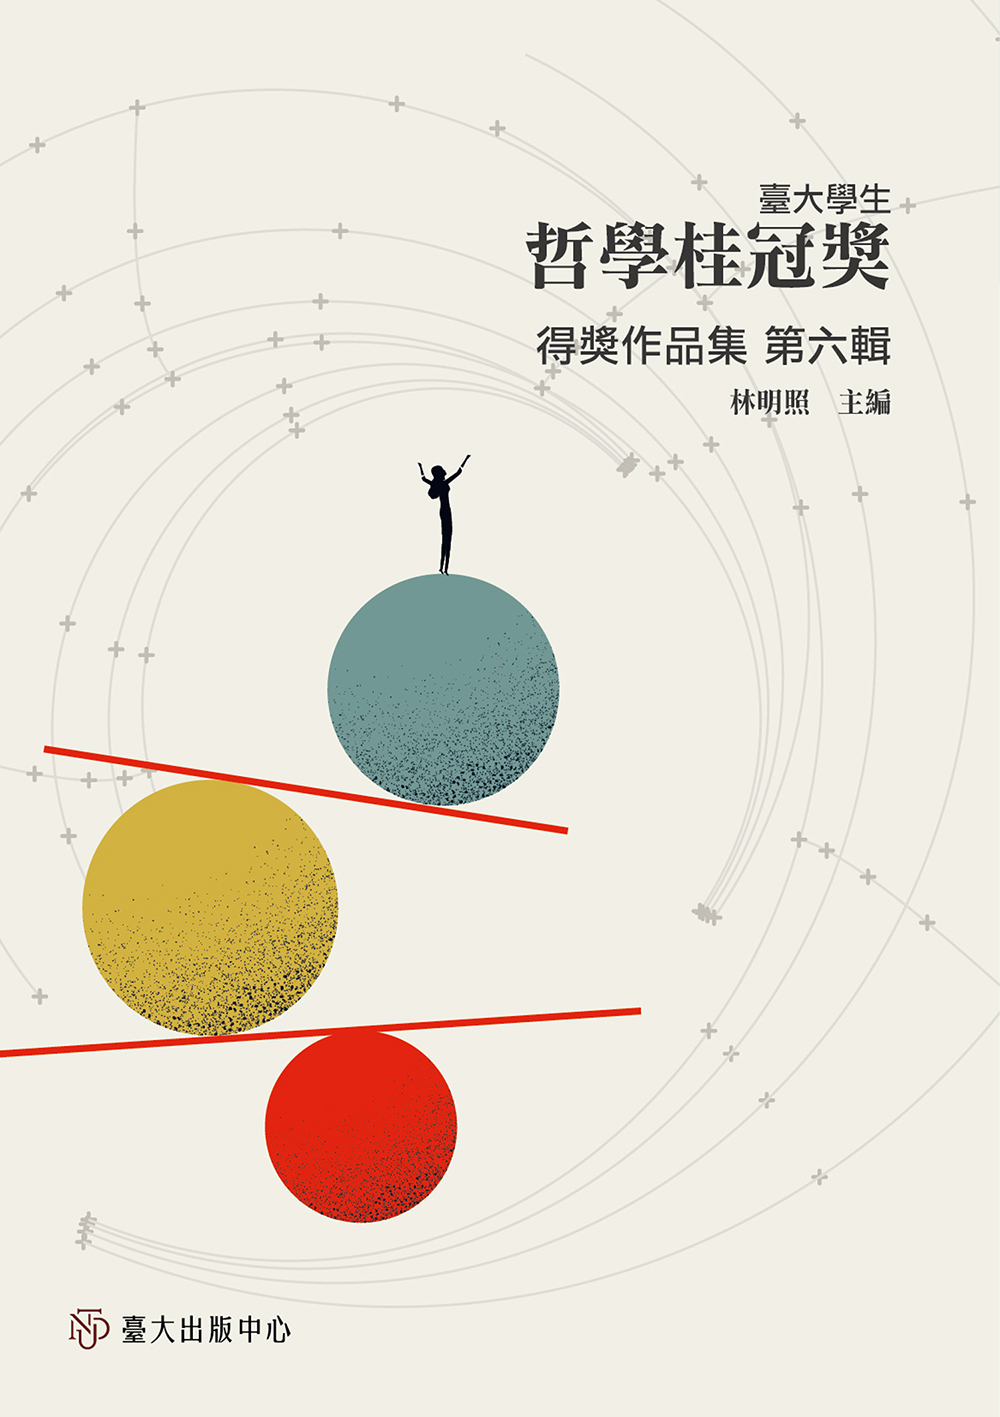 Prize-winning Works of National Taiwan University Student Laureate for Philosophical Treatise, Vol. 6